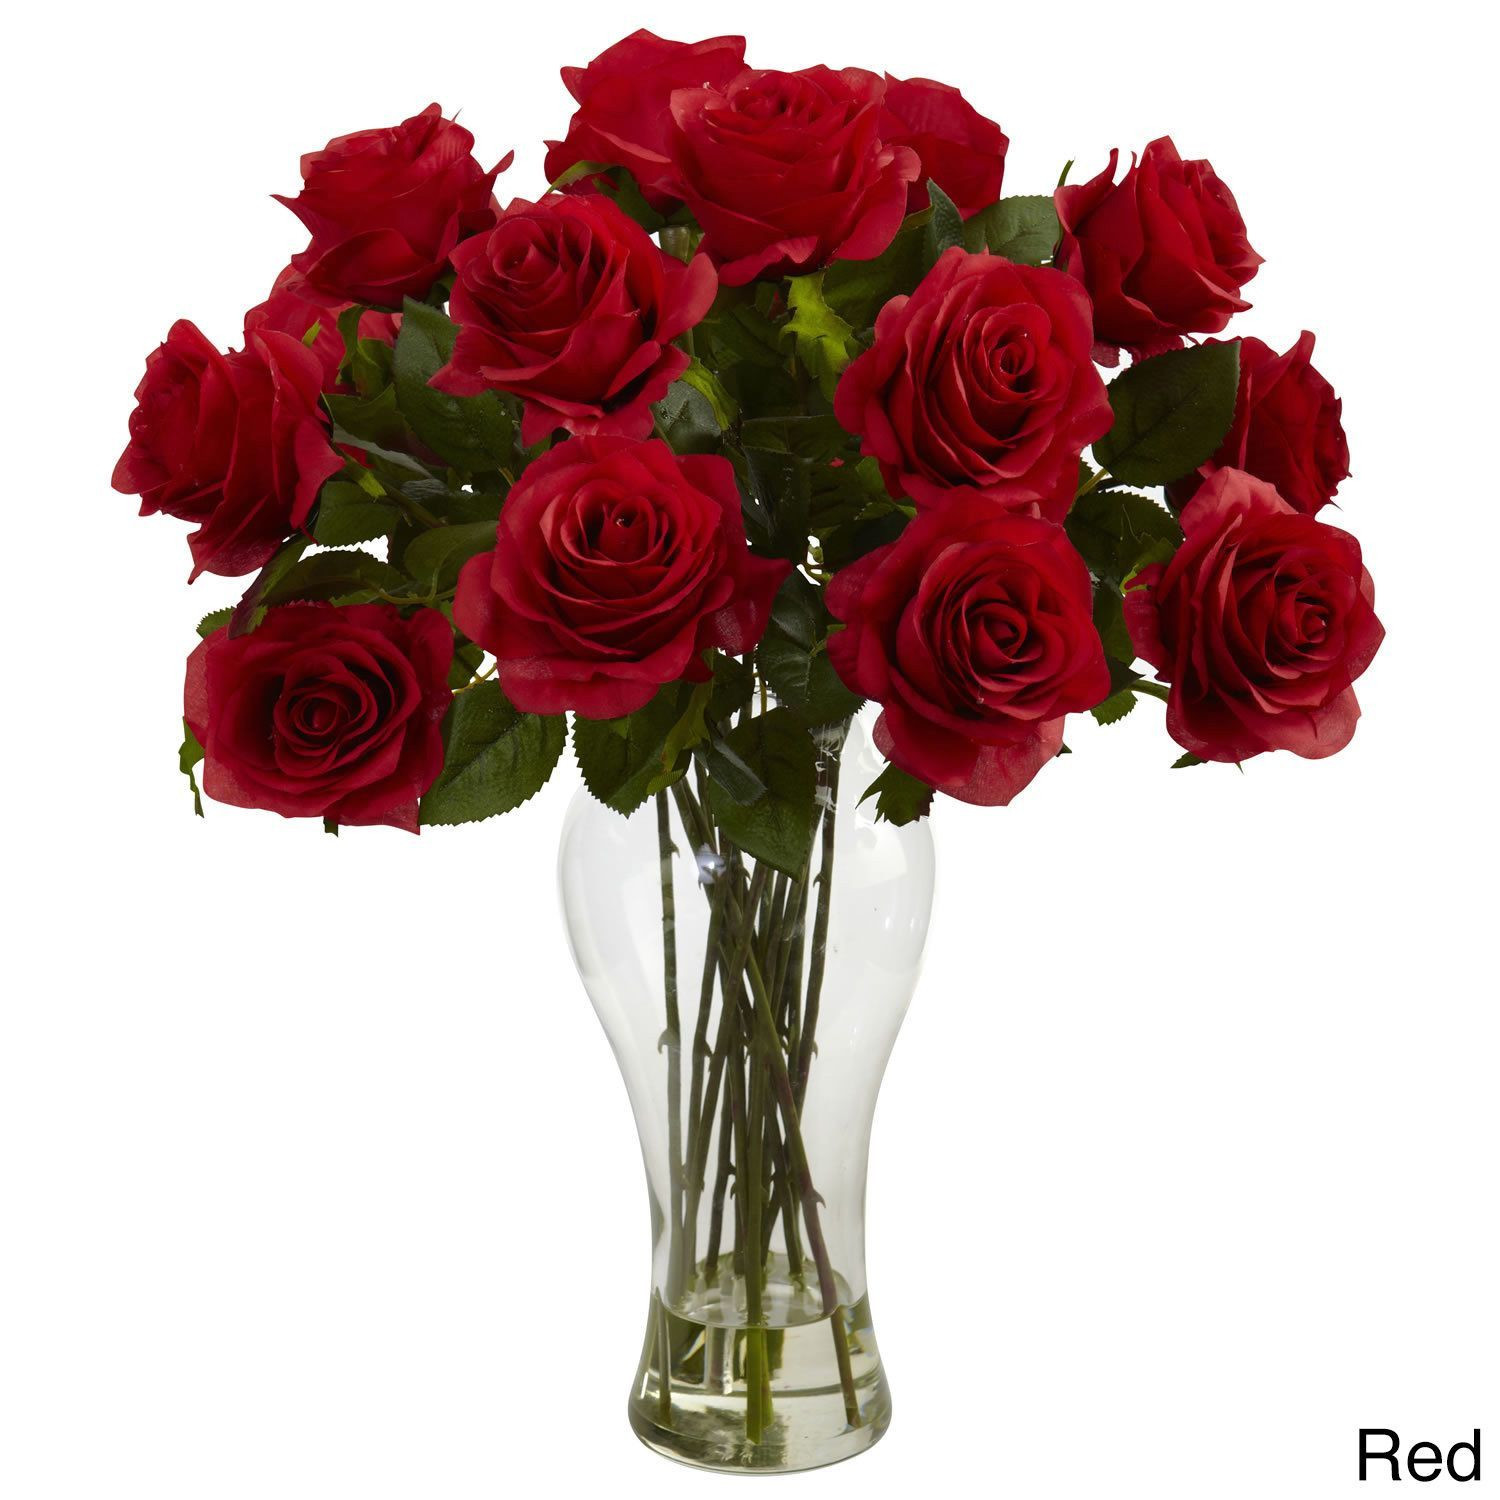 25 attractive Vase and Faux Flowers 2022 free download vase and faux flowers of nearly natural blooming roses vase blooming roses w vase red with regard to nearly natural blooming roses vase blooming roses w vase red plastic